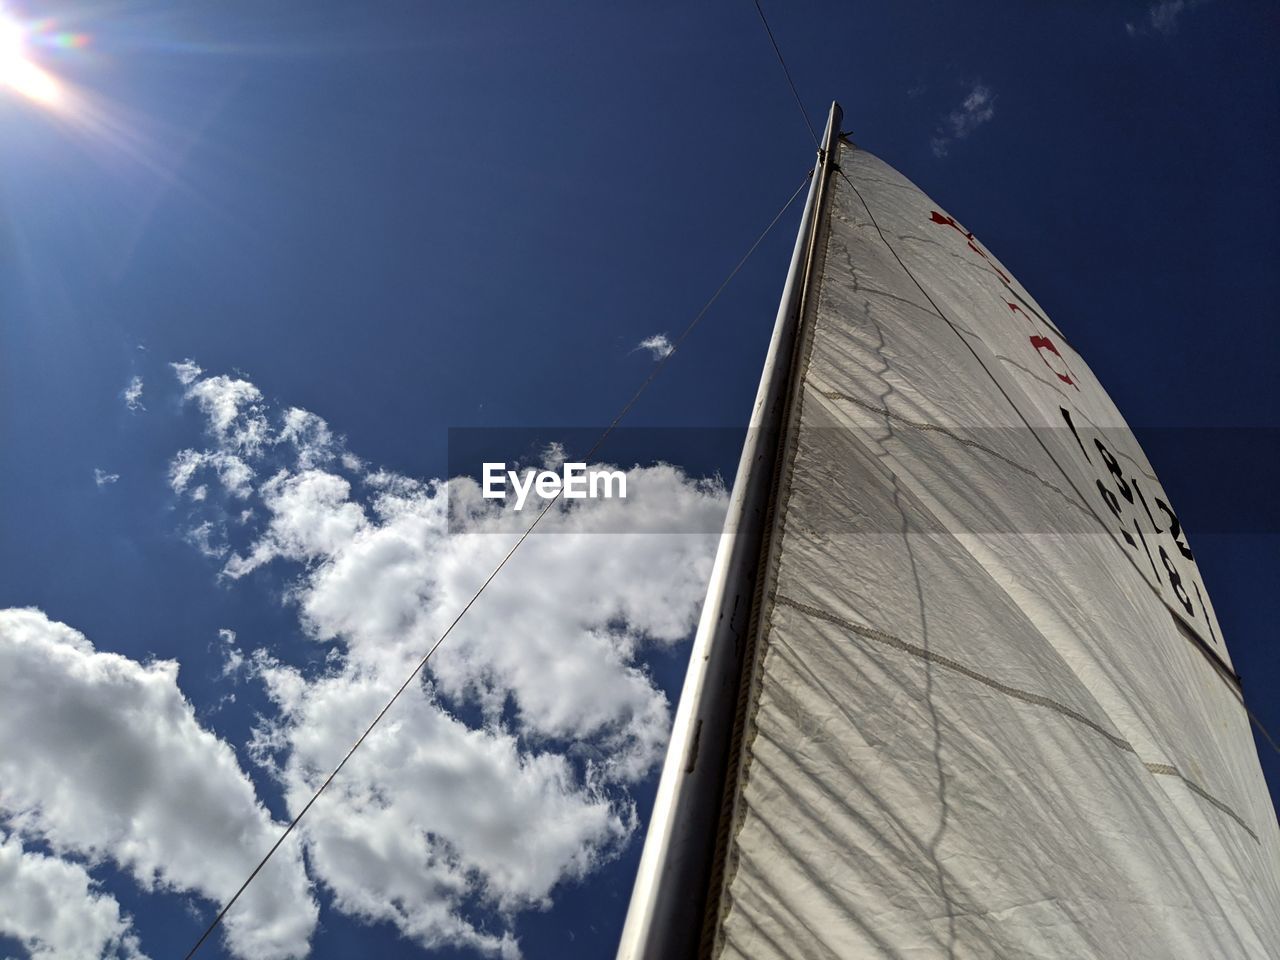 LOW ANGLE VIEW OF SAILBOAT AGAINST CLOUDY SKY